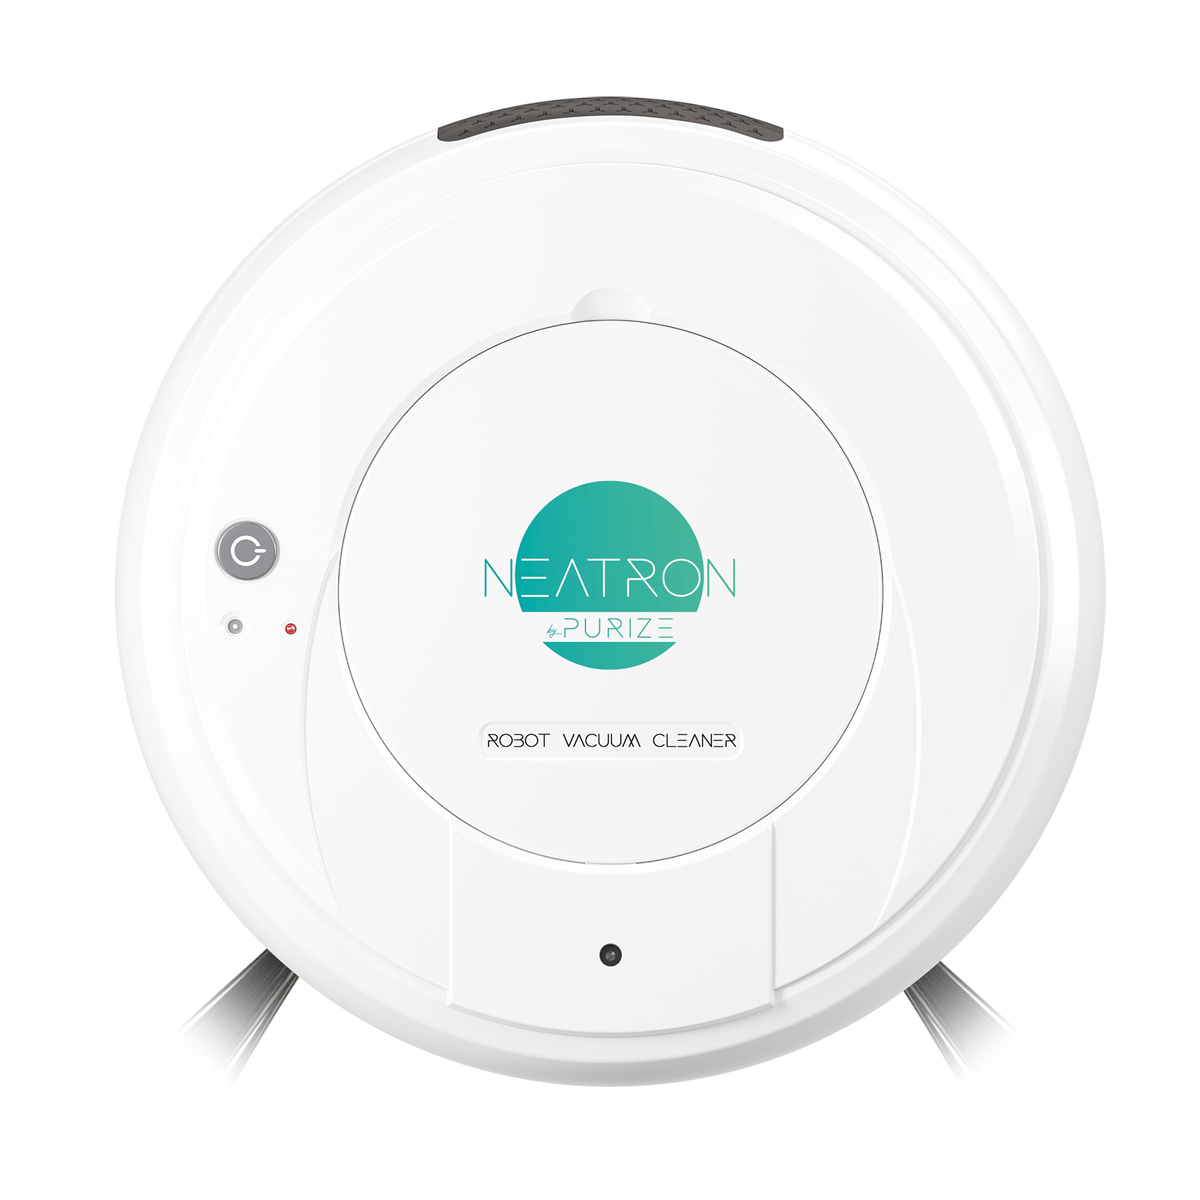 BEST DIRECT Purize Neatron Staubsauger Roboter